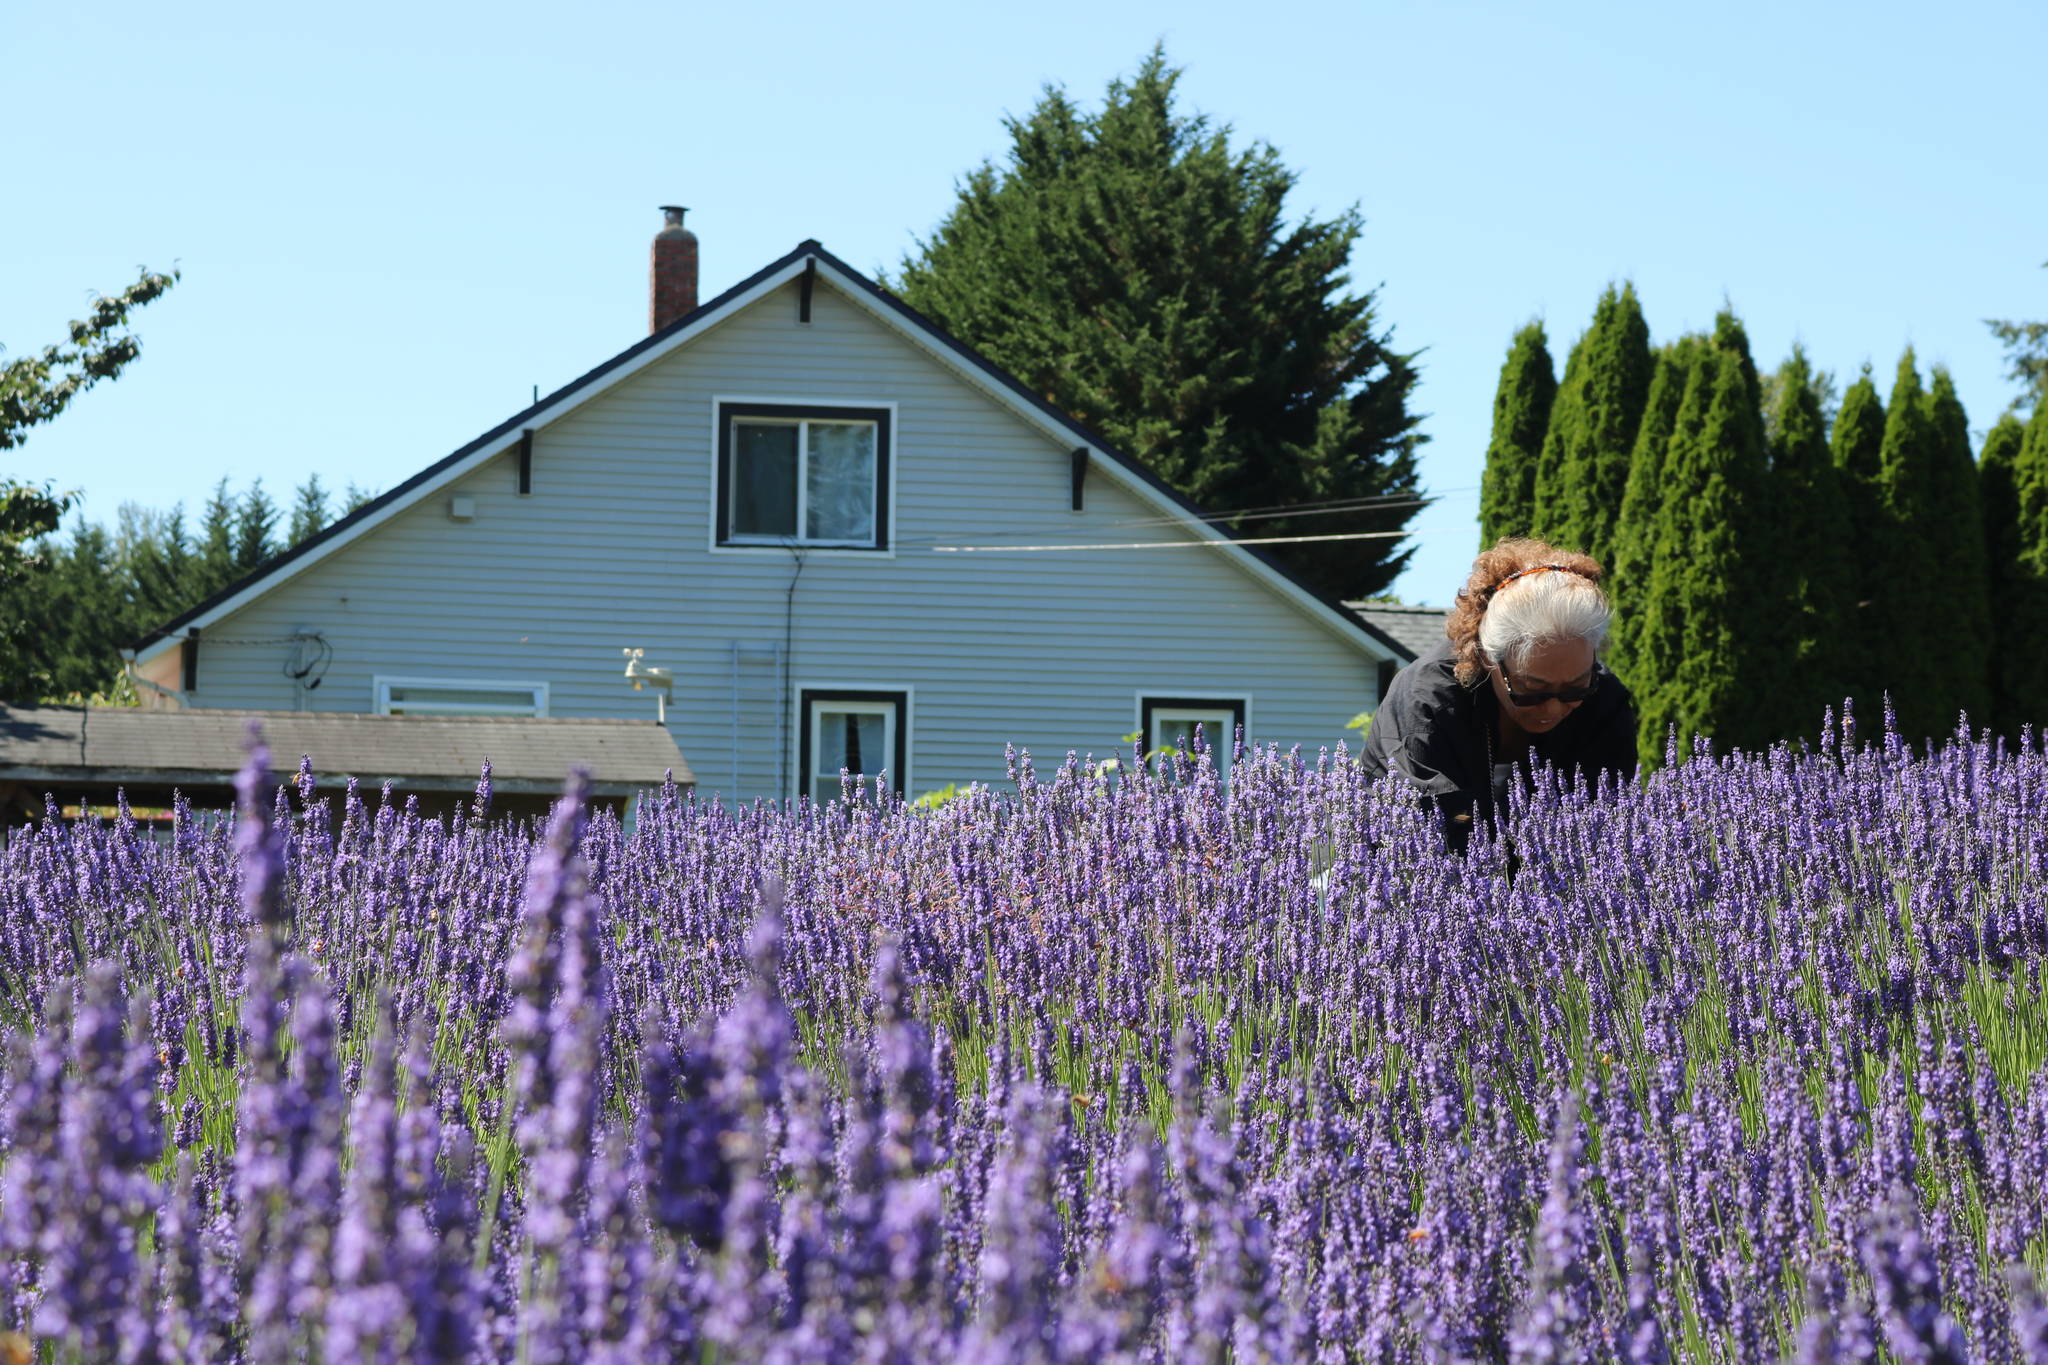 A woman gathers flowers at Snofalls Lavender Farm outside Fall City on July 18, 2020. Aaron Kunkler/staff photo